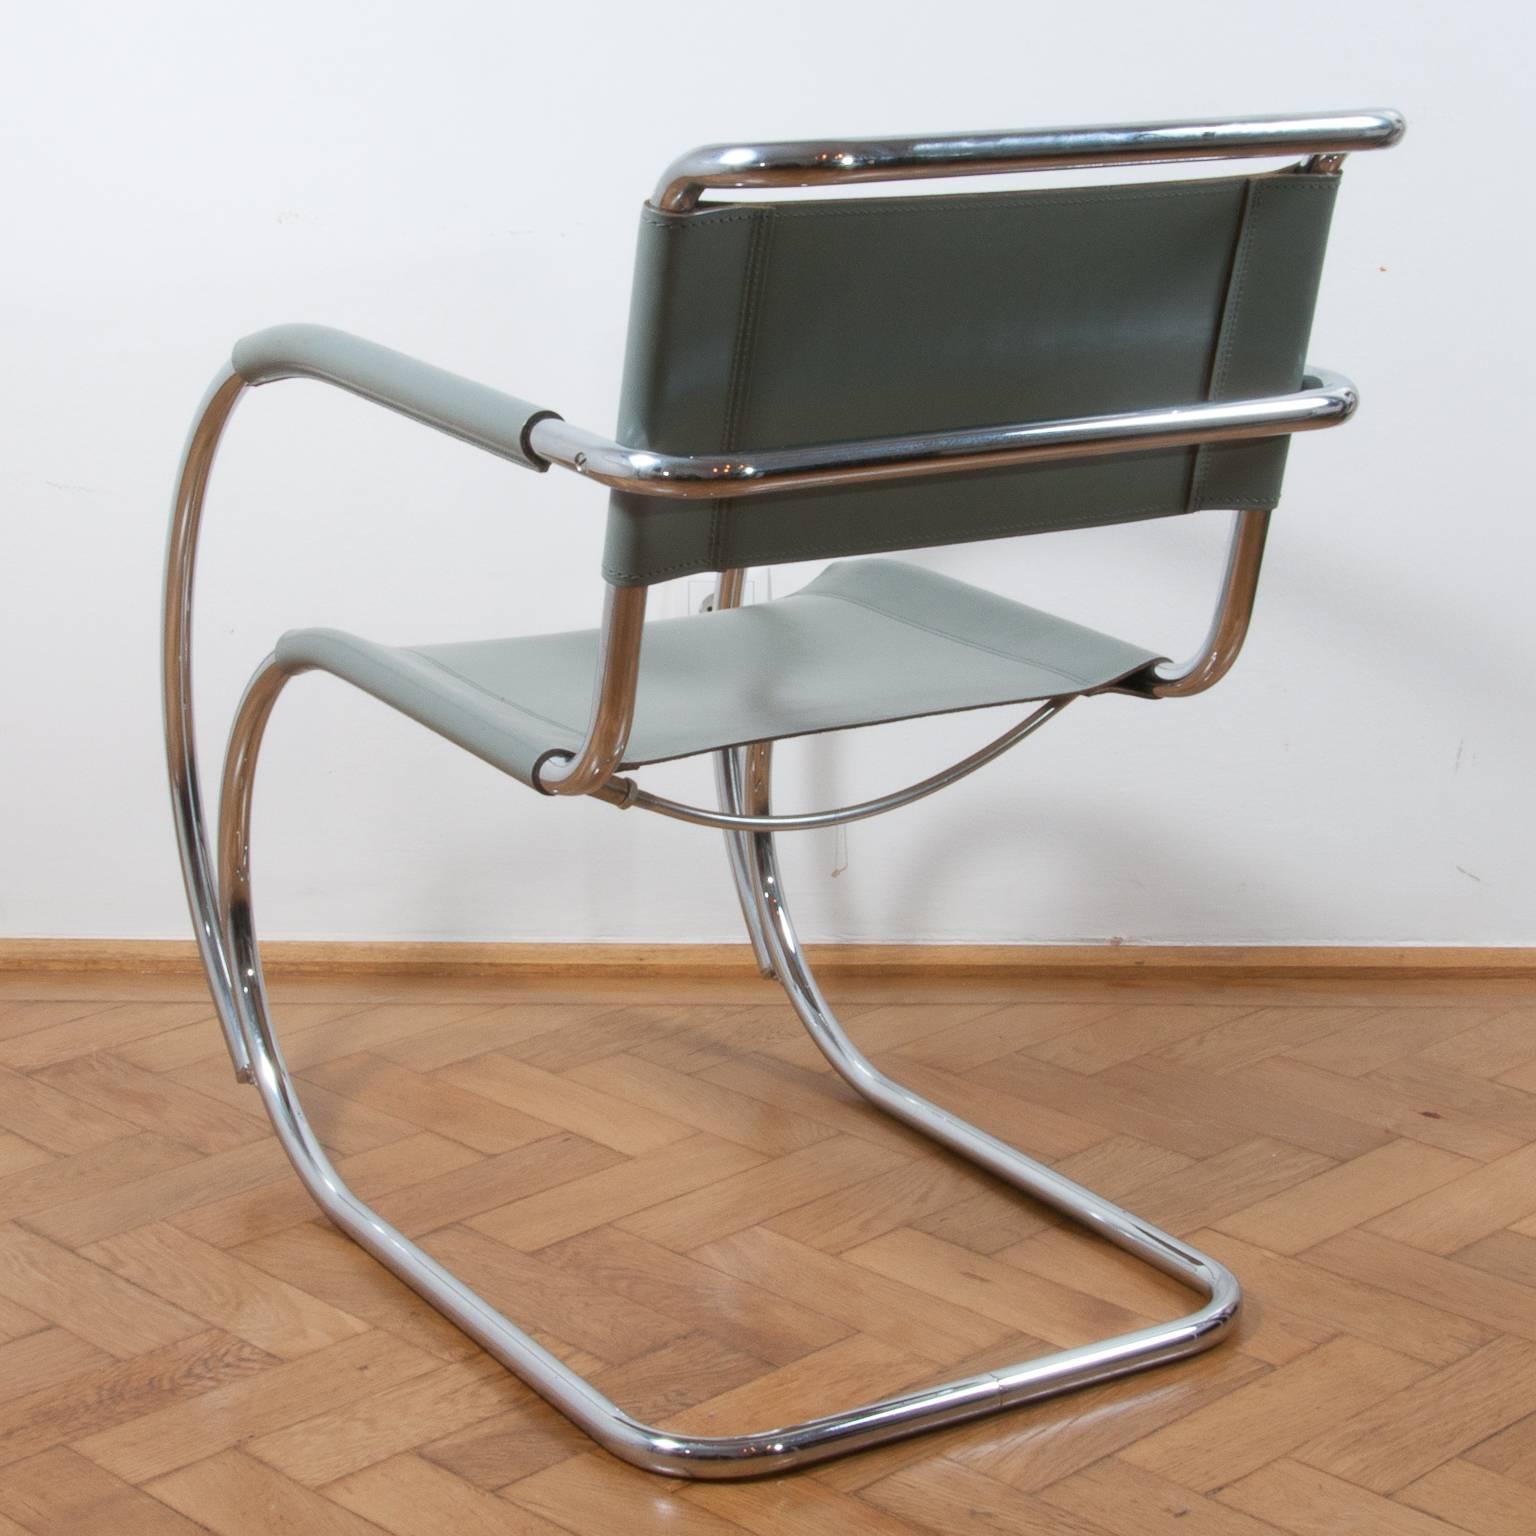 Thonet S533 Cantilever Chair, Armchair, Lounge Chair Designed by L. Mies vd Rohe In Good Condition For Sale In Vienna, AT